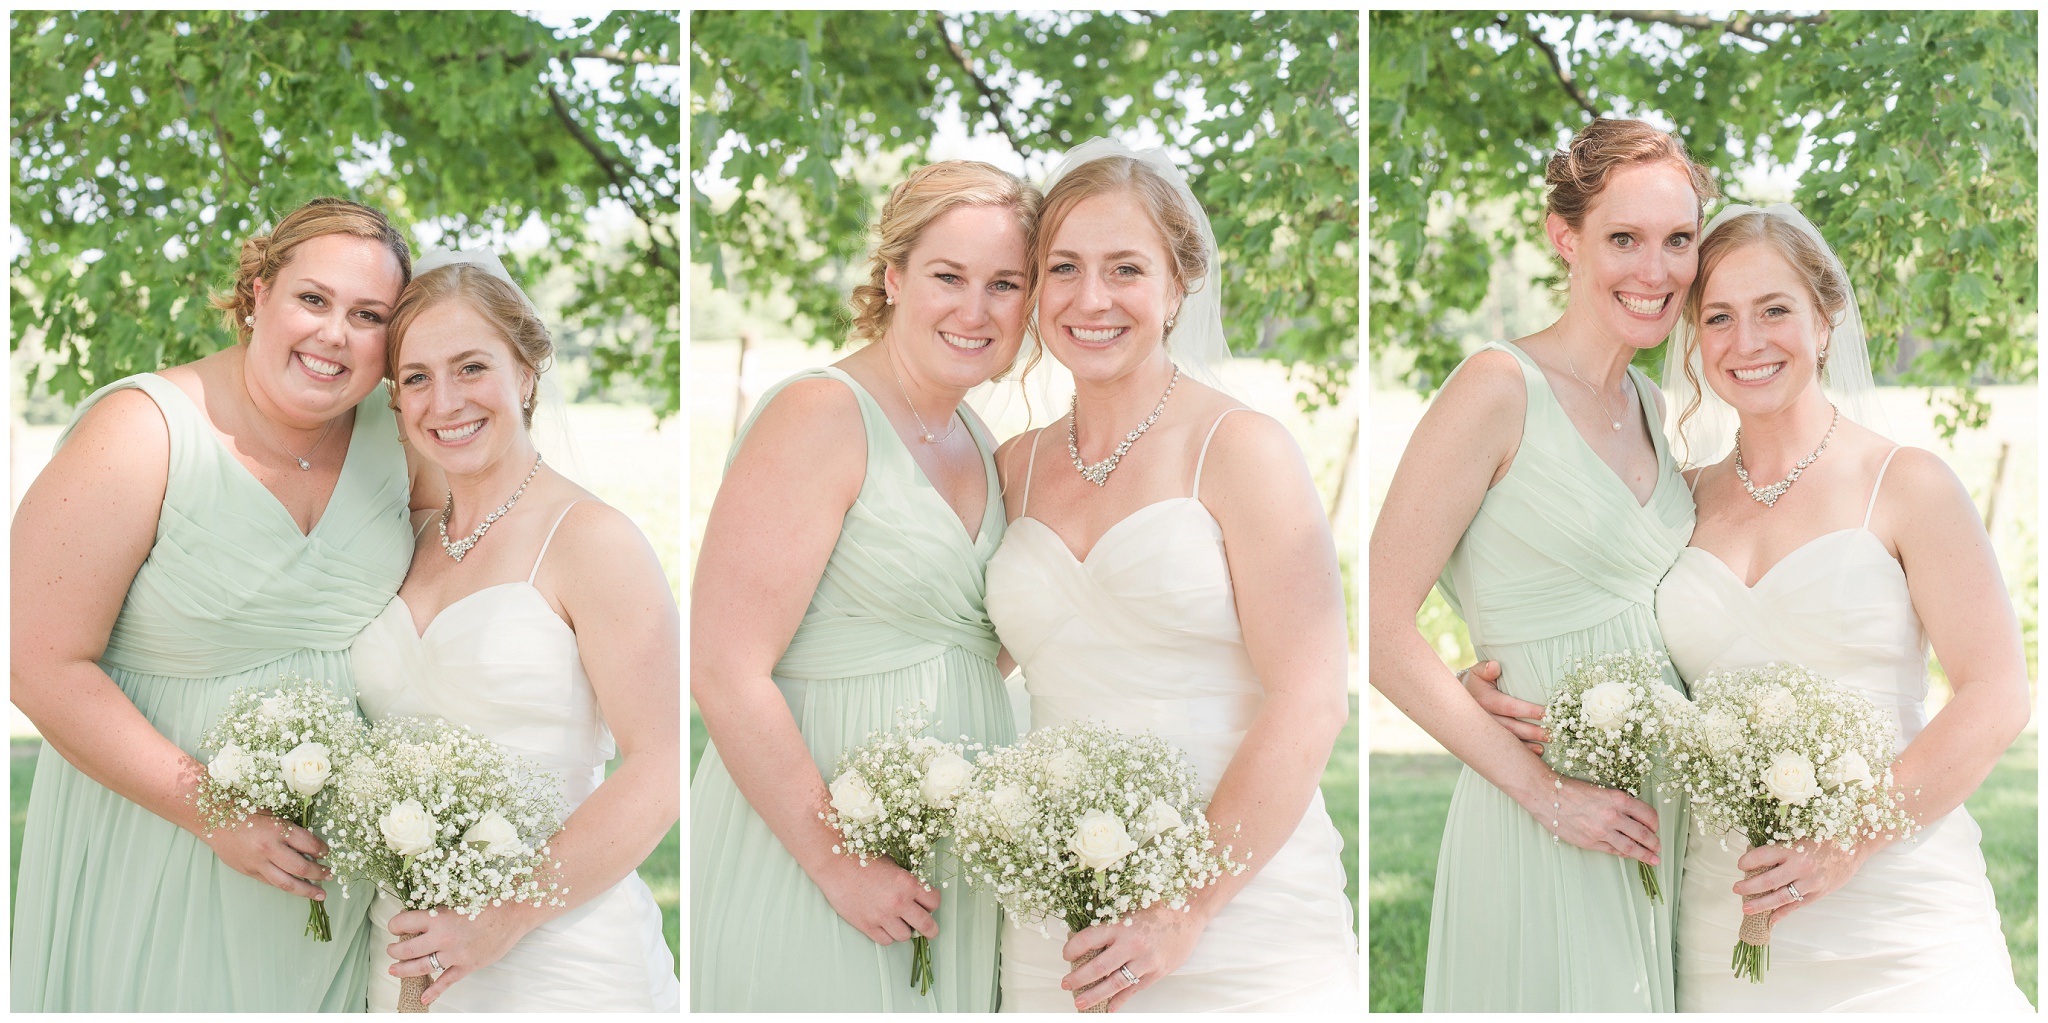 Seacoast NH Wedding Photographer - flag Hill Winery Outdoor Wedding - Sage and White Wedding - Amy Brown Photography 